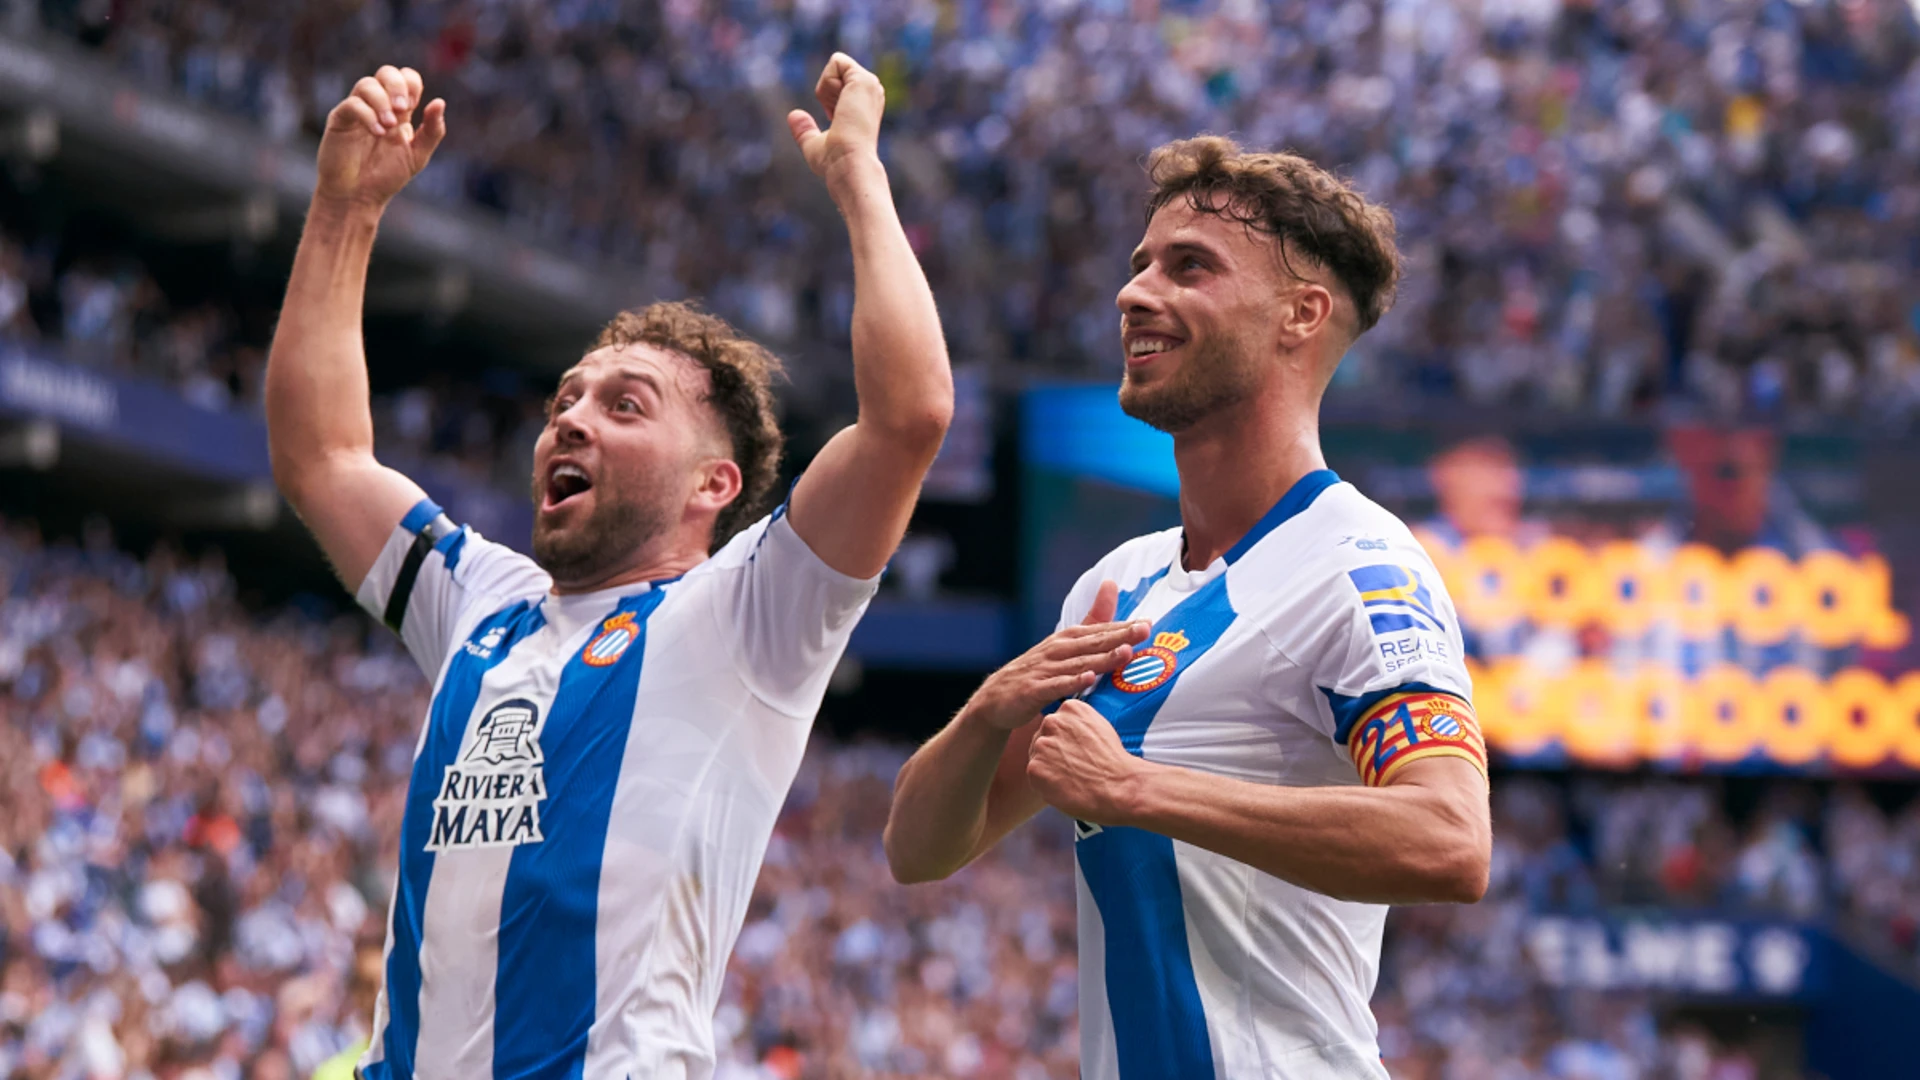 Espanyol promoted to LaLiga with play-off win over Oviedo